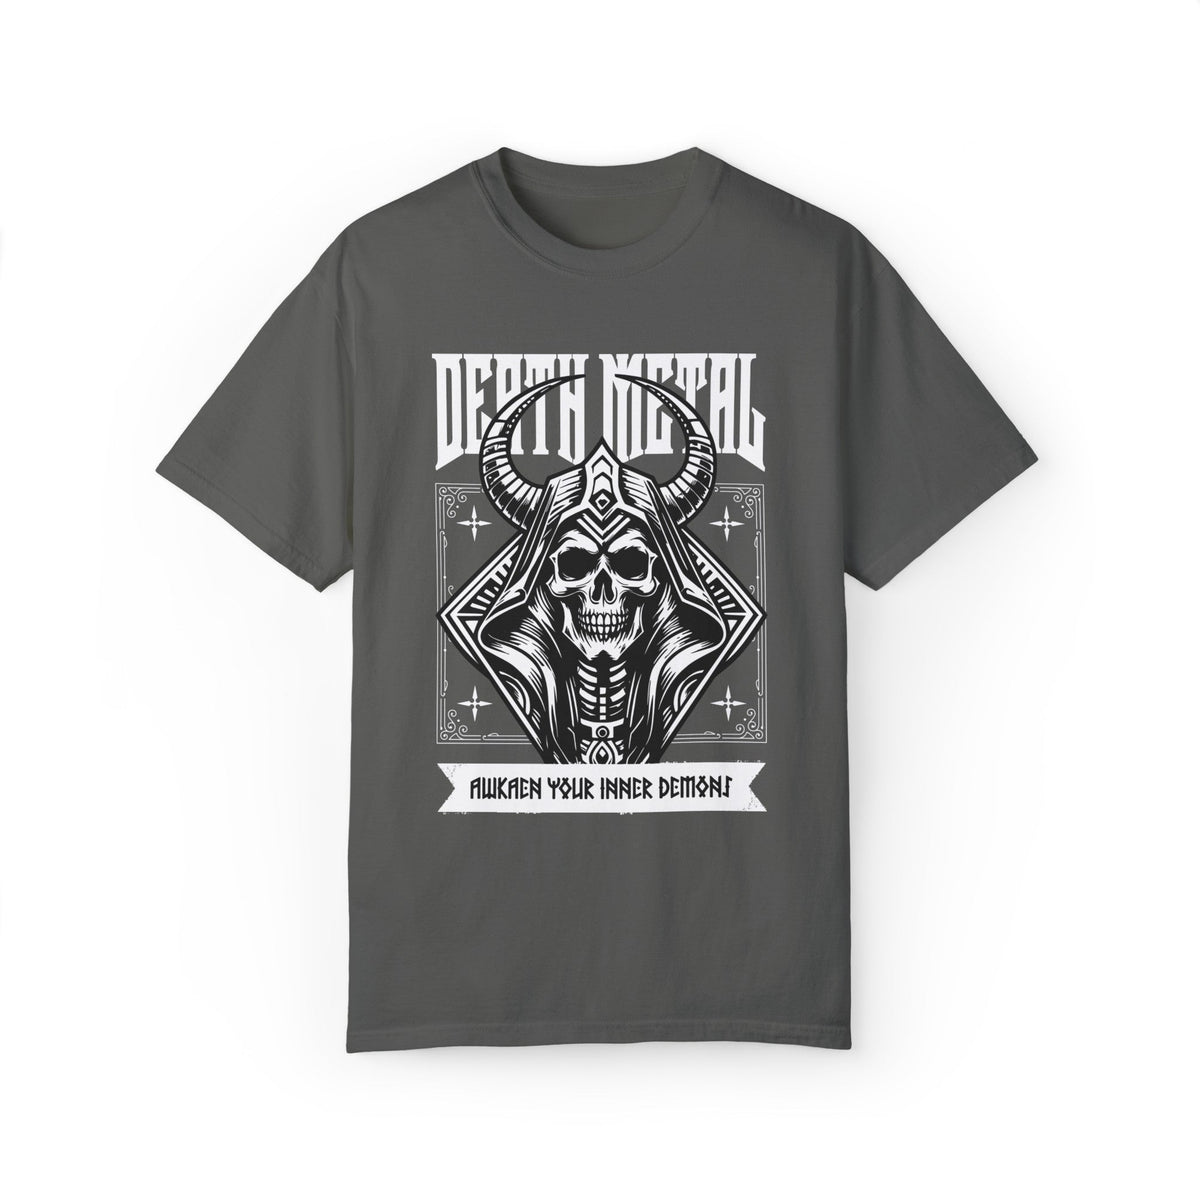 Death Metal Oversized Beefy Tee - Goth Cloth Co.T - Shirt29166059911681161437